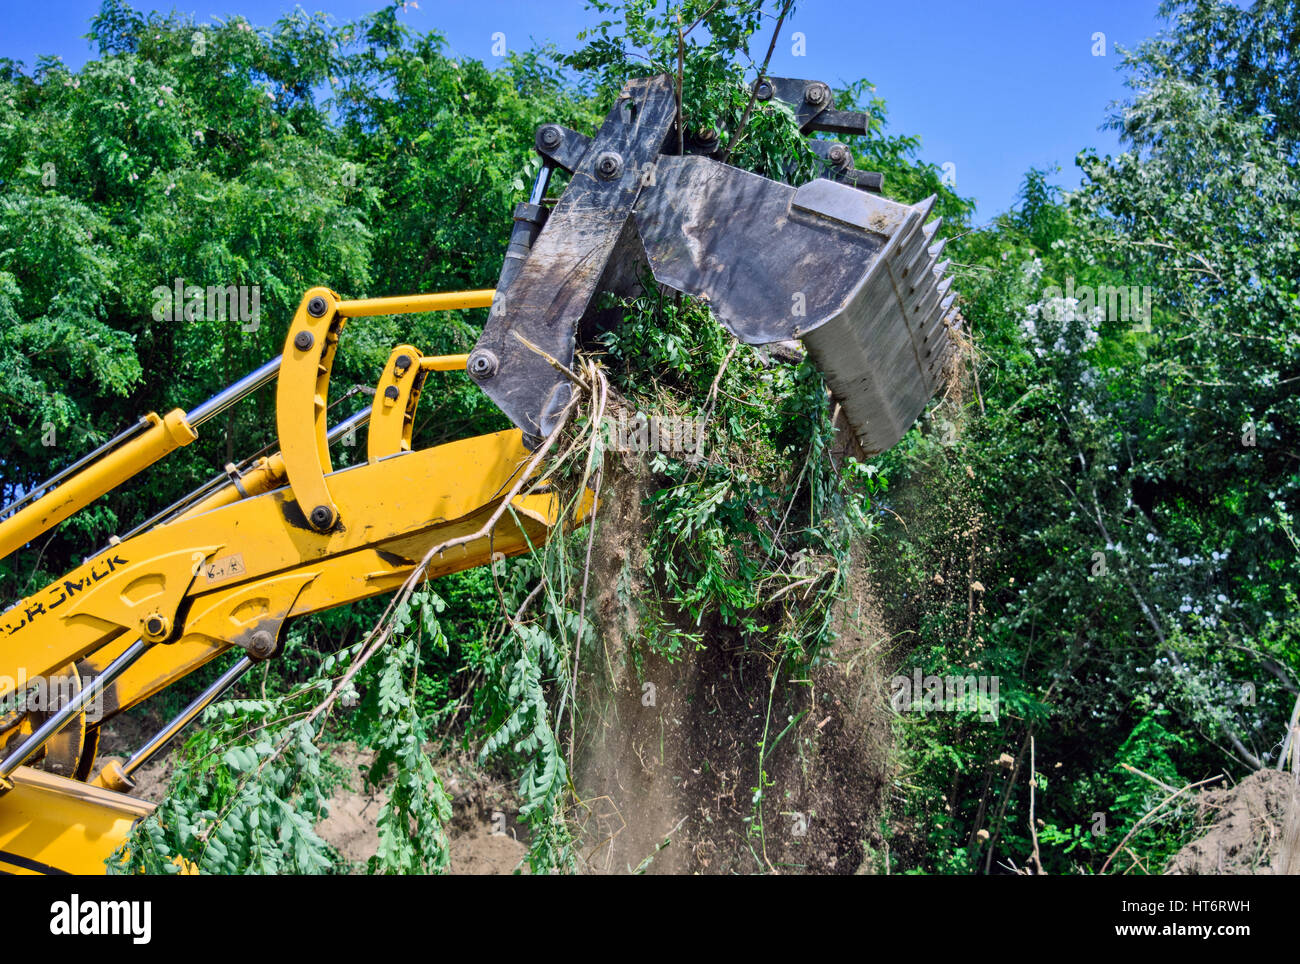 Excavator with bucket loading sand and rubble for removal. Stock Photo